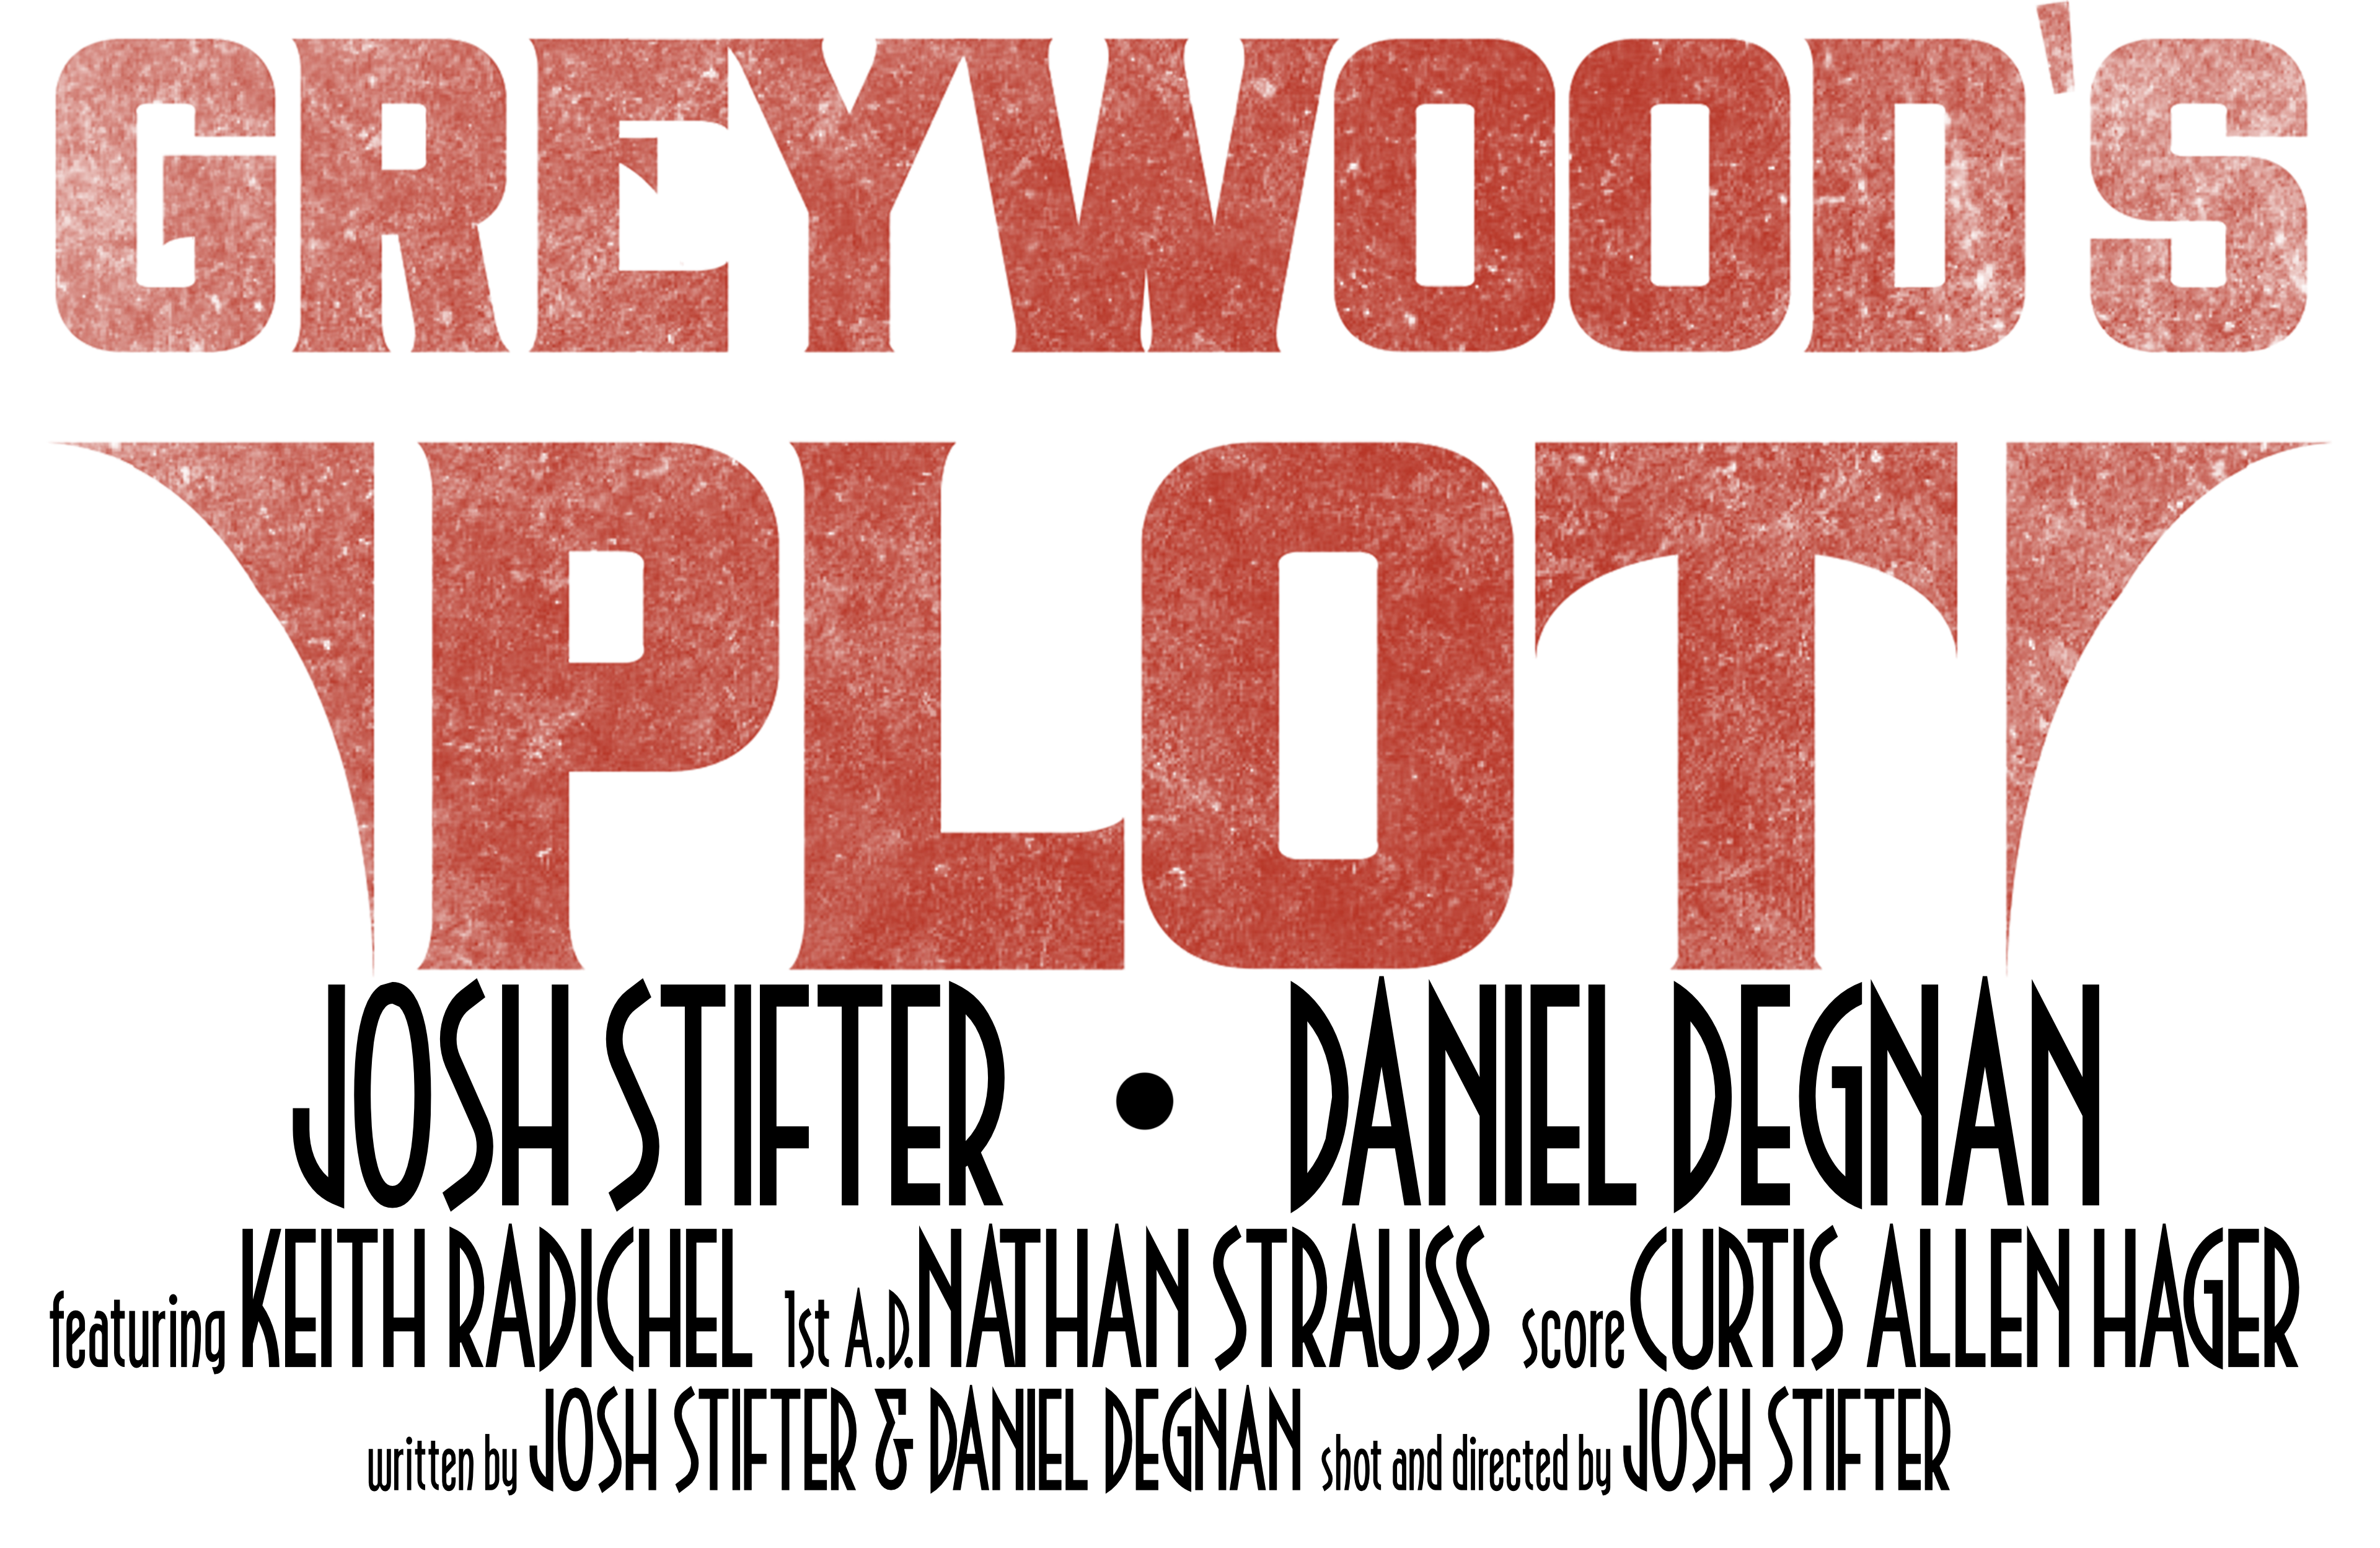 Greywood's Plot. Josh Stifter and Daniel Degnan. Featuring Keith Radichel. First A.D. by Nathan Strauss. Score by Curtis Allen Hager. Written by Josh Stifter and Daniel Degnan. Shot and directed by Josh Stifter.